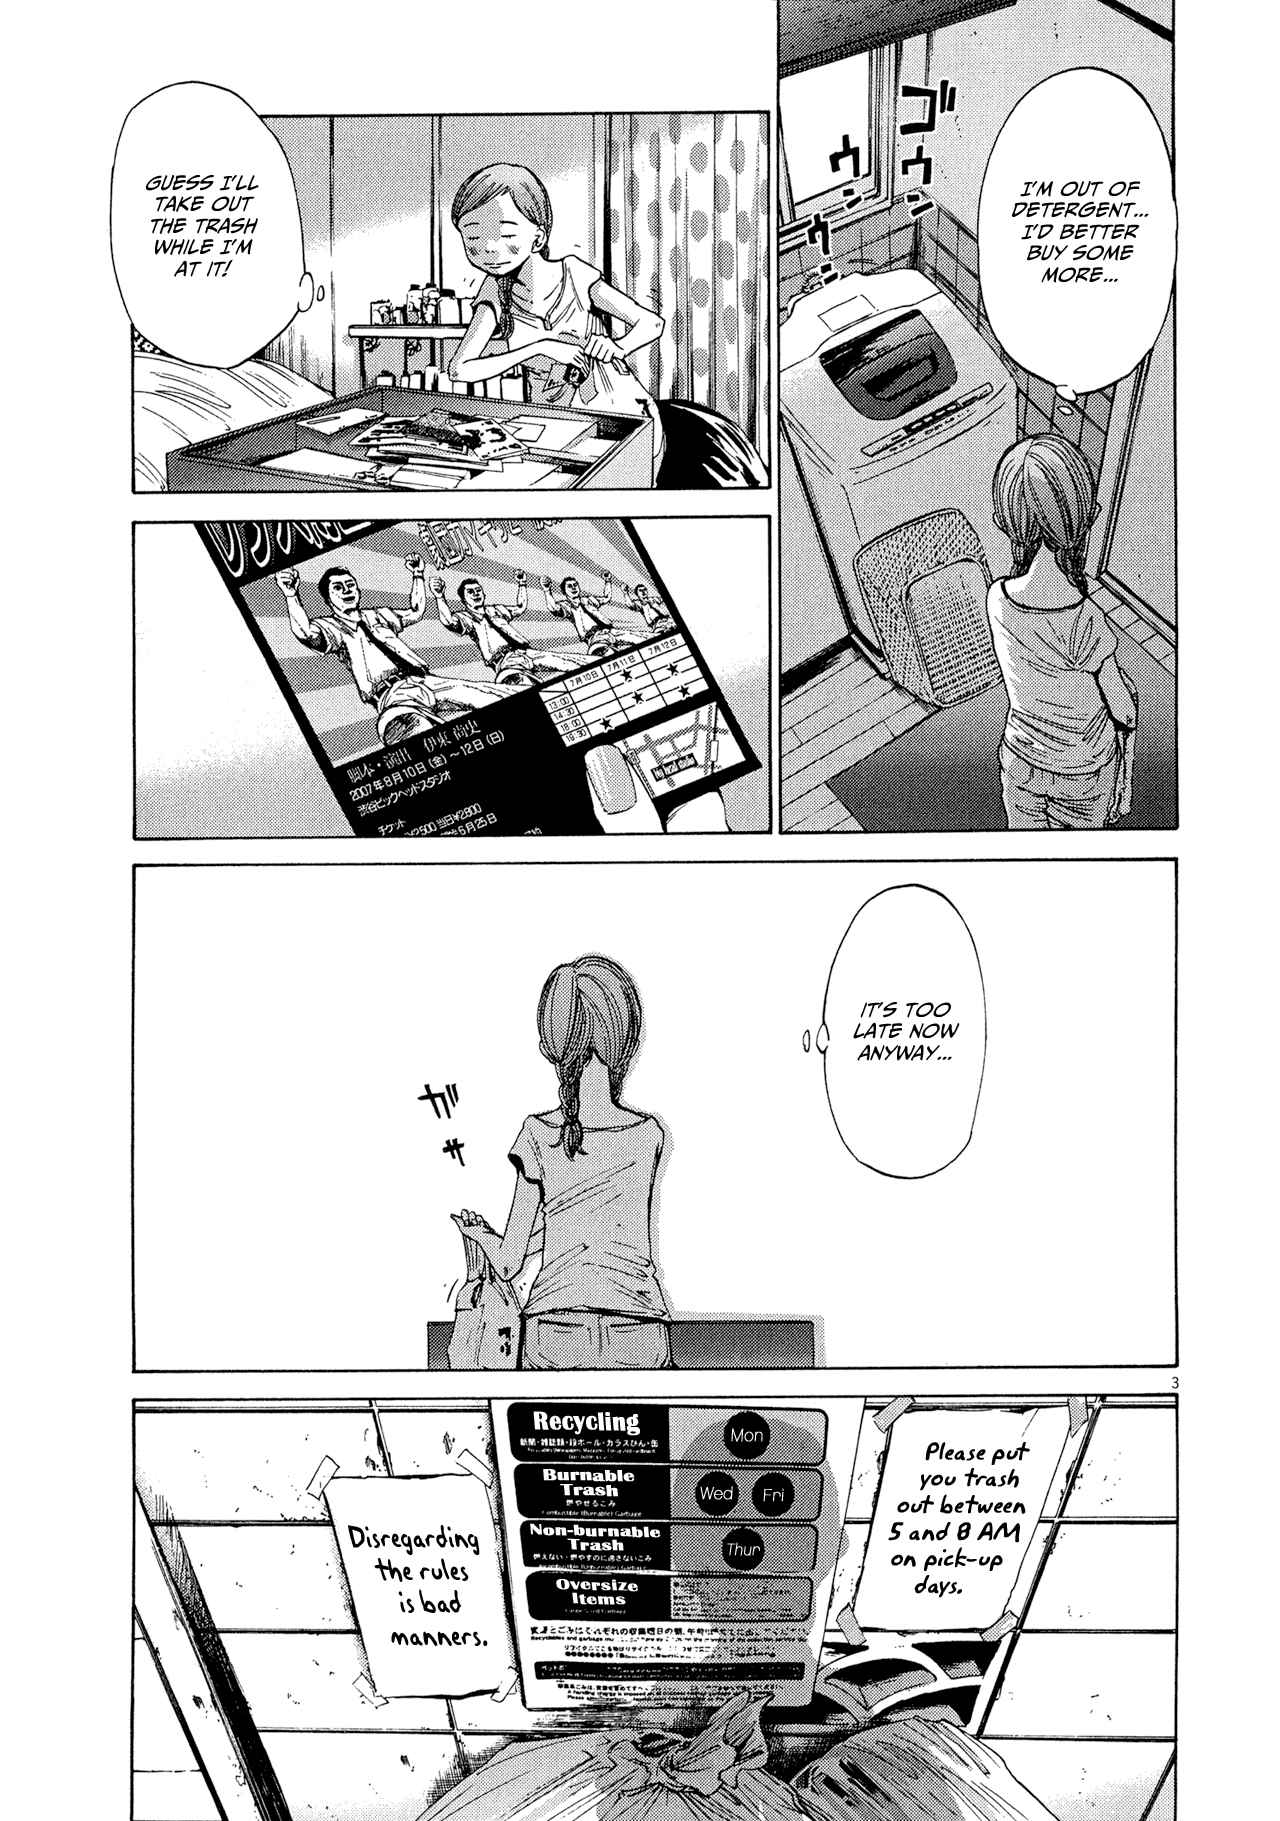 Sekai no Owari to Yoakemae Vol. 1 Ch. 7 How to Spend a Day Off